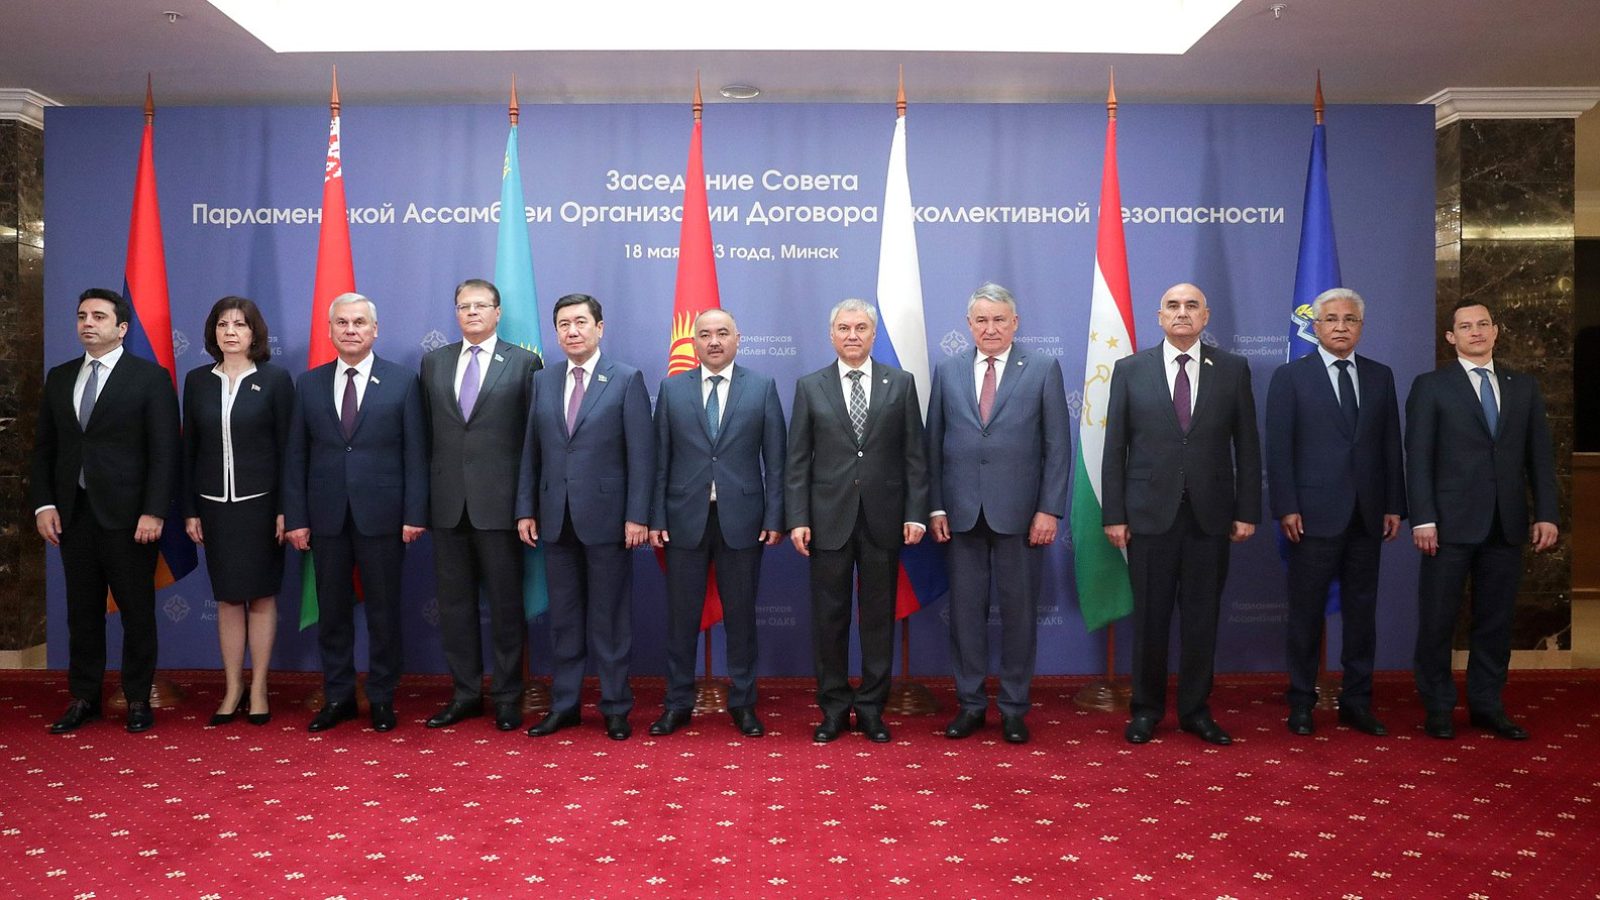 CSTO leaders posing in front of their flags at a meeting in Minsk